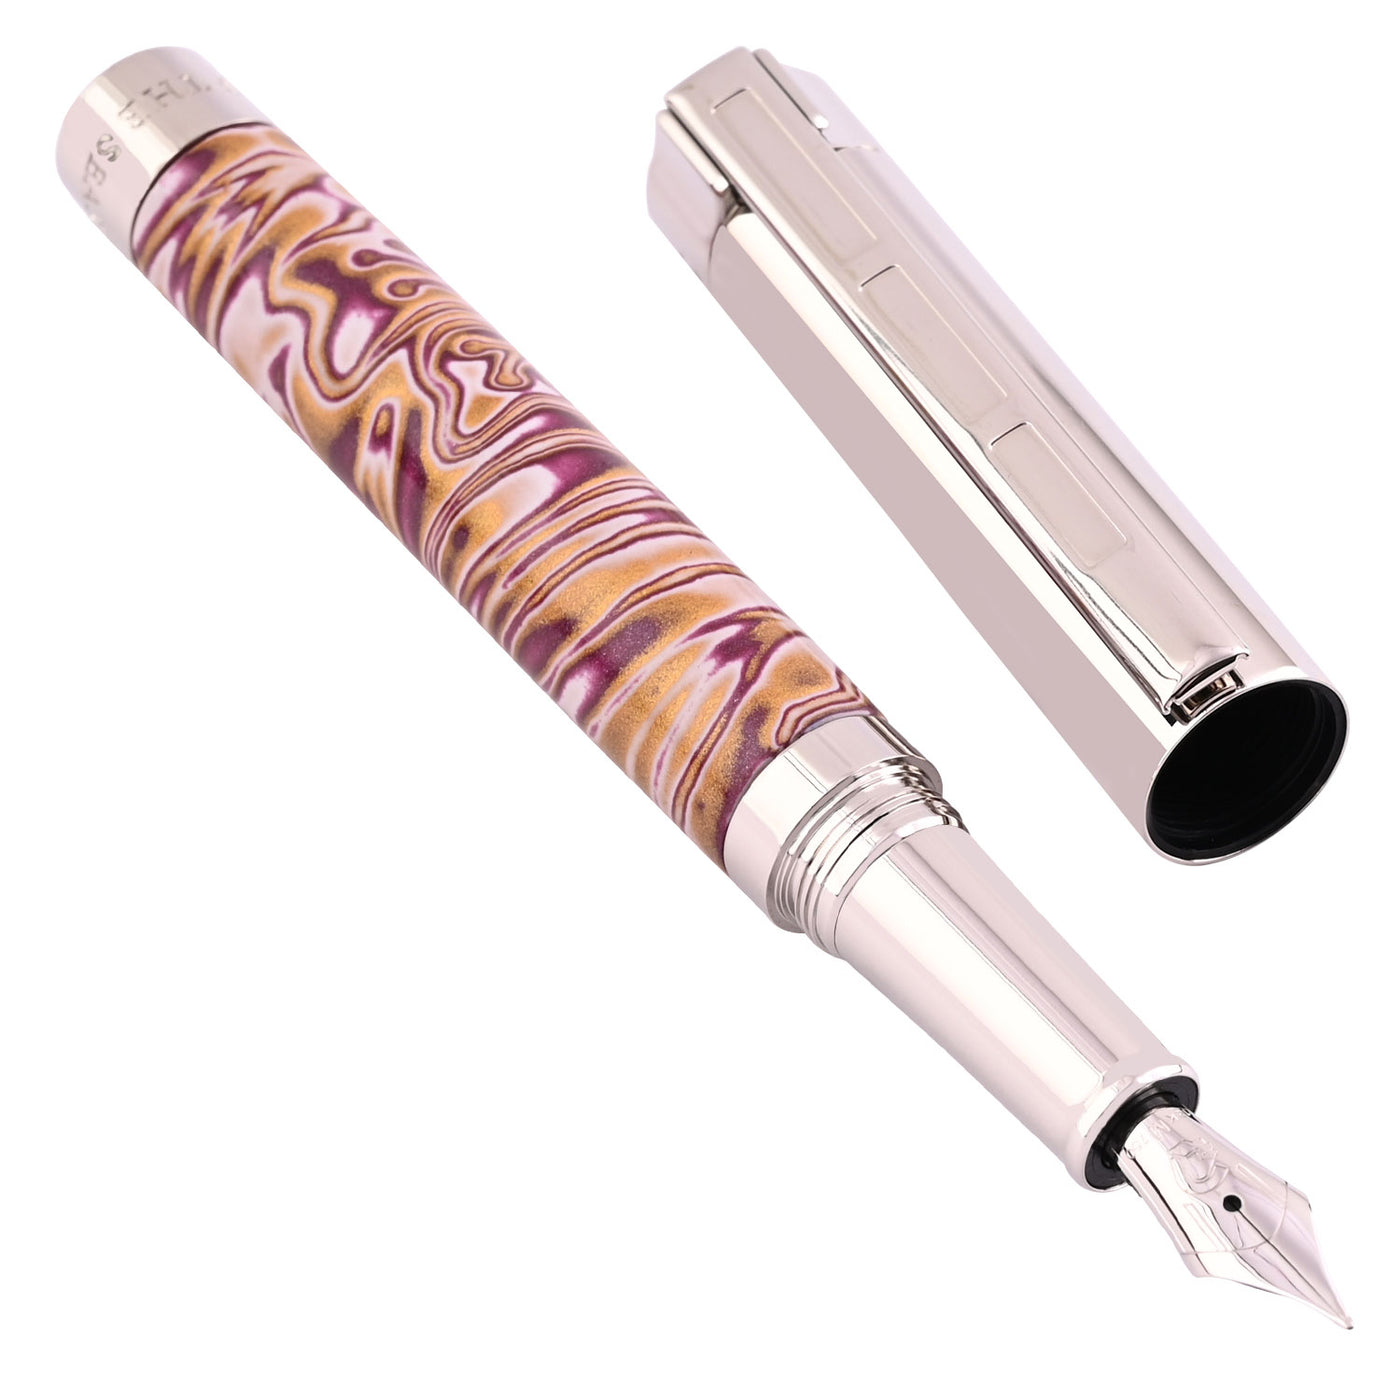 Staedtler Premium Pen of the Season Fountain Pen - Brown CT (Limited Edition)